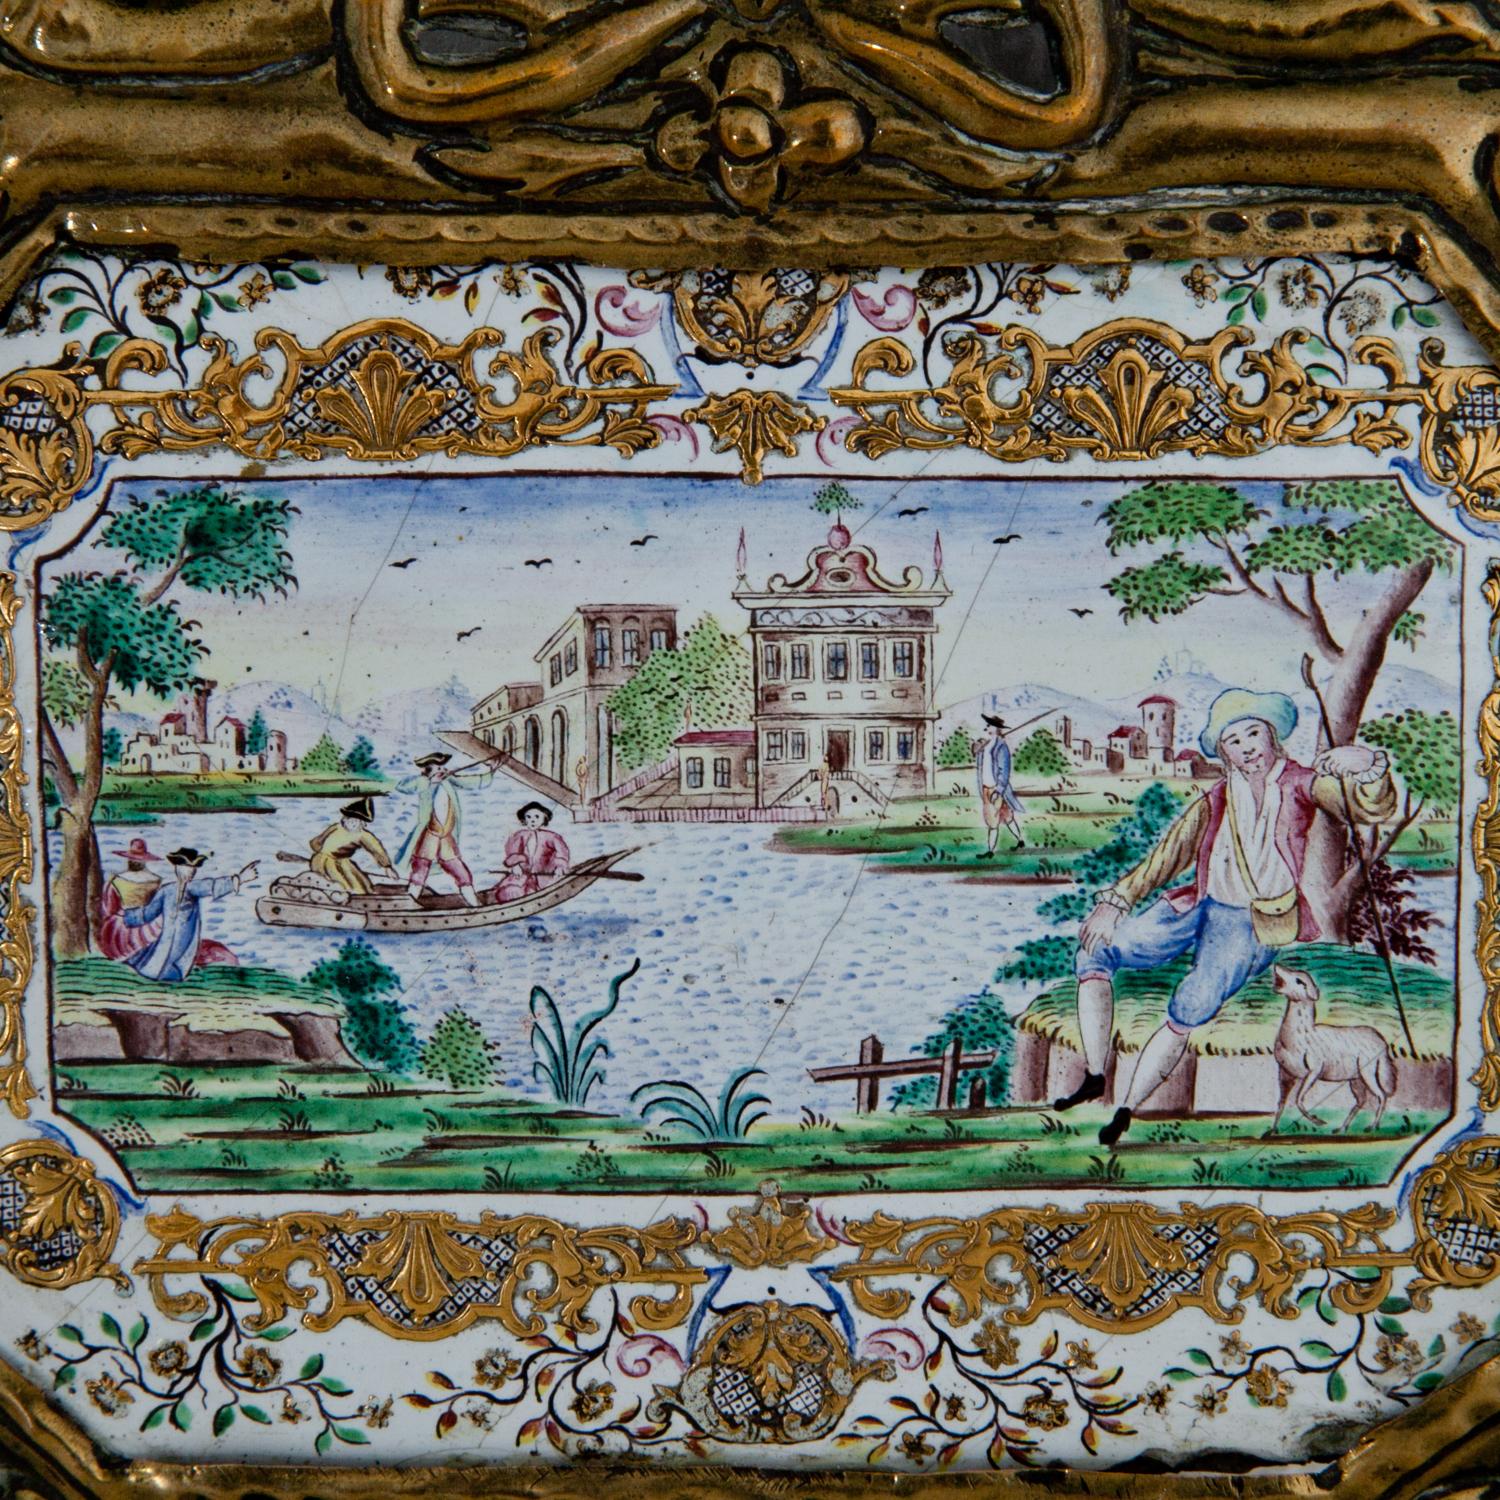 Lid of a larger box with an enamel painting in the style of Samuel Gottlieb Rohner, later framed in a brass frame. For similar objects see: Mariusz Widerynski: Wilanow - Der Palast, p. 98, fig. 120.